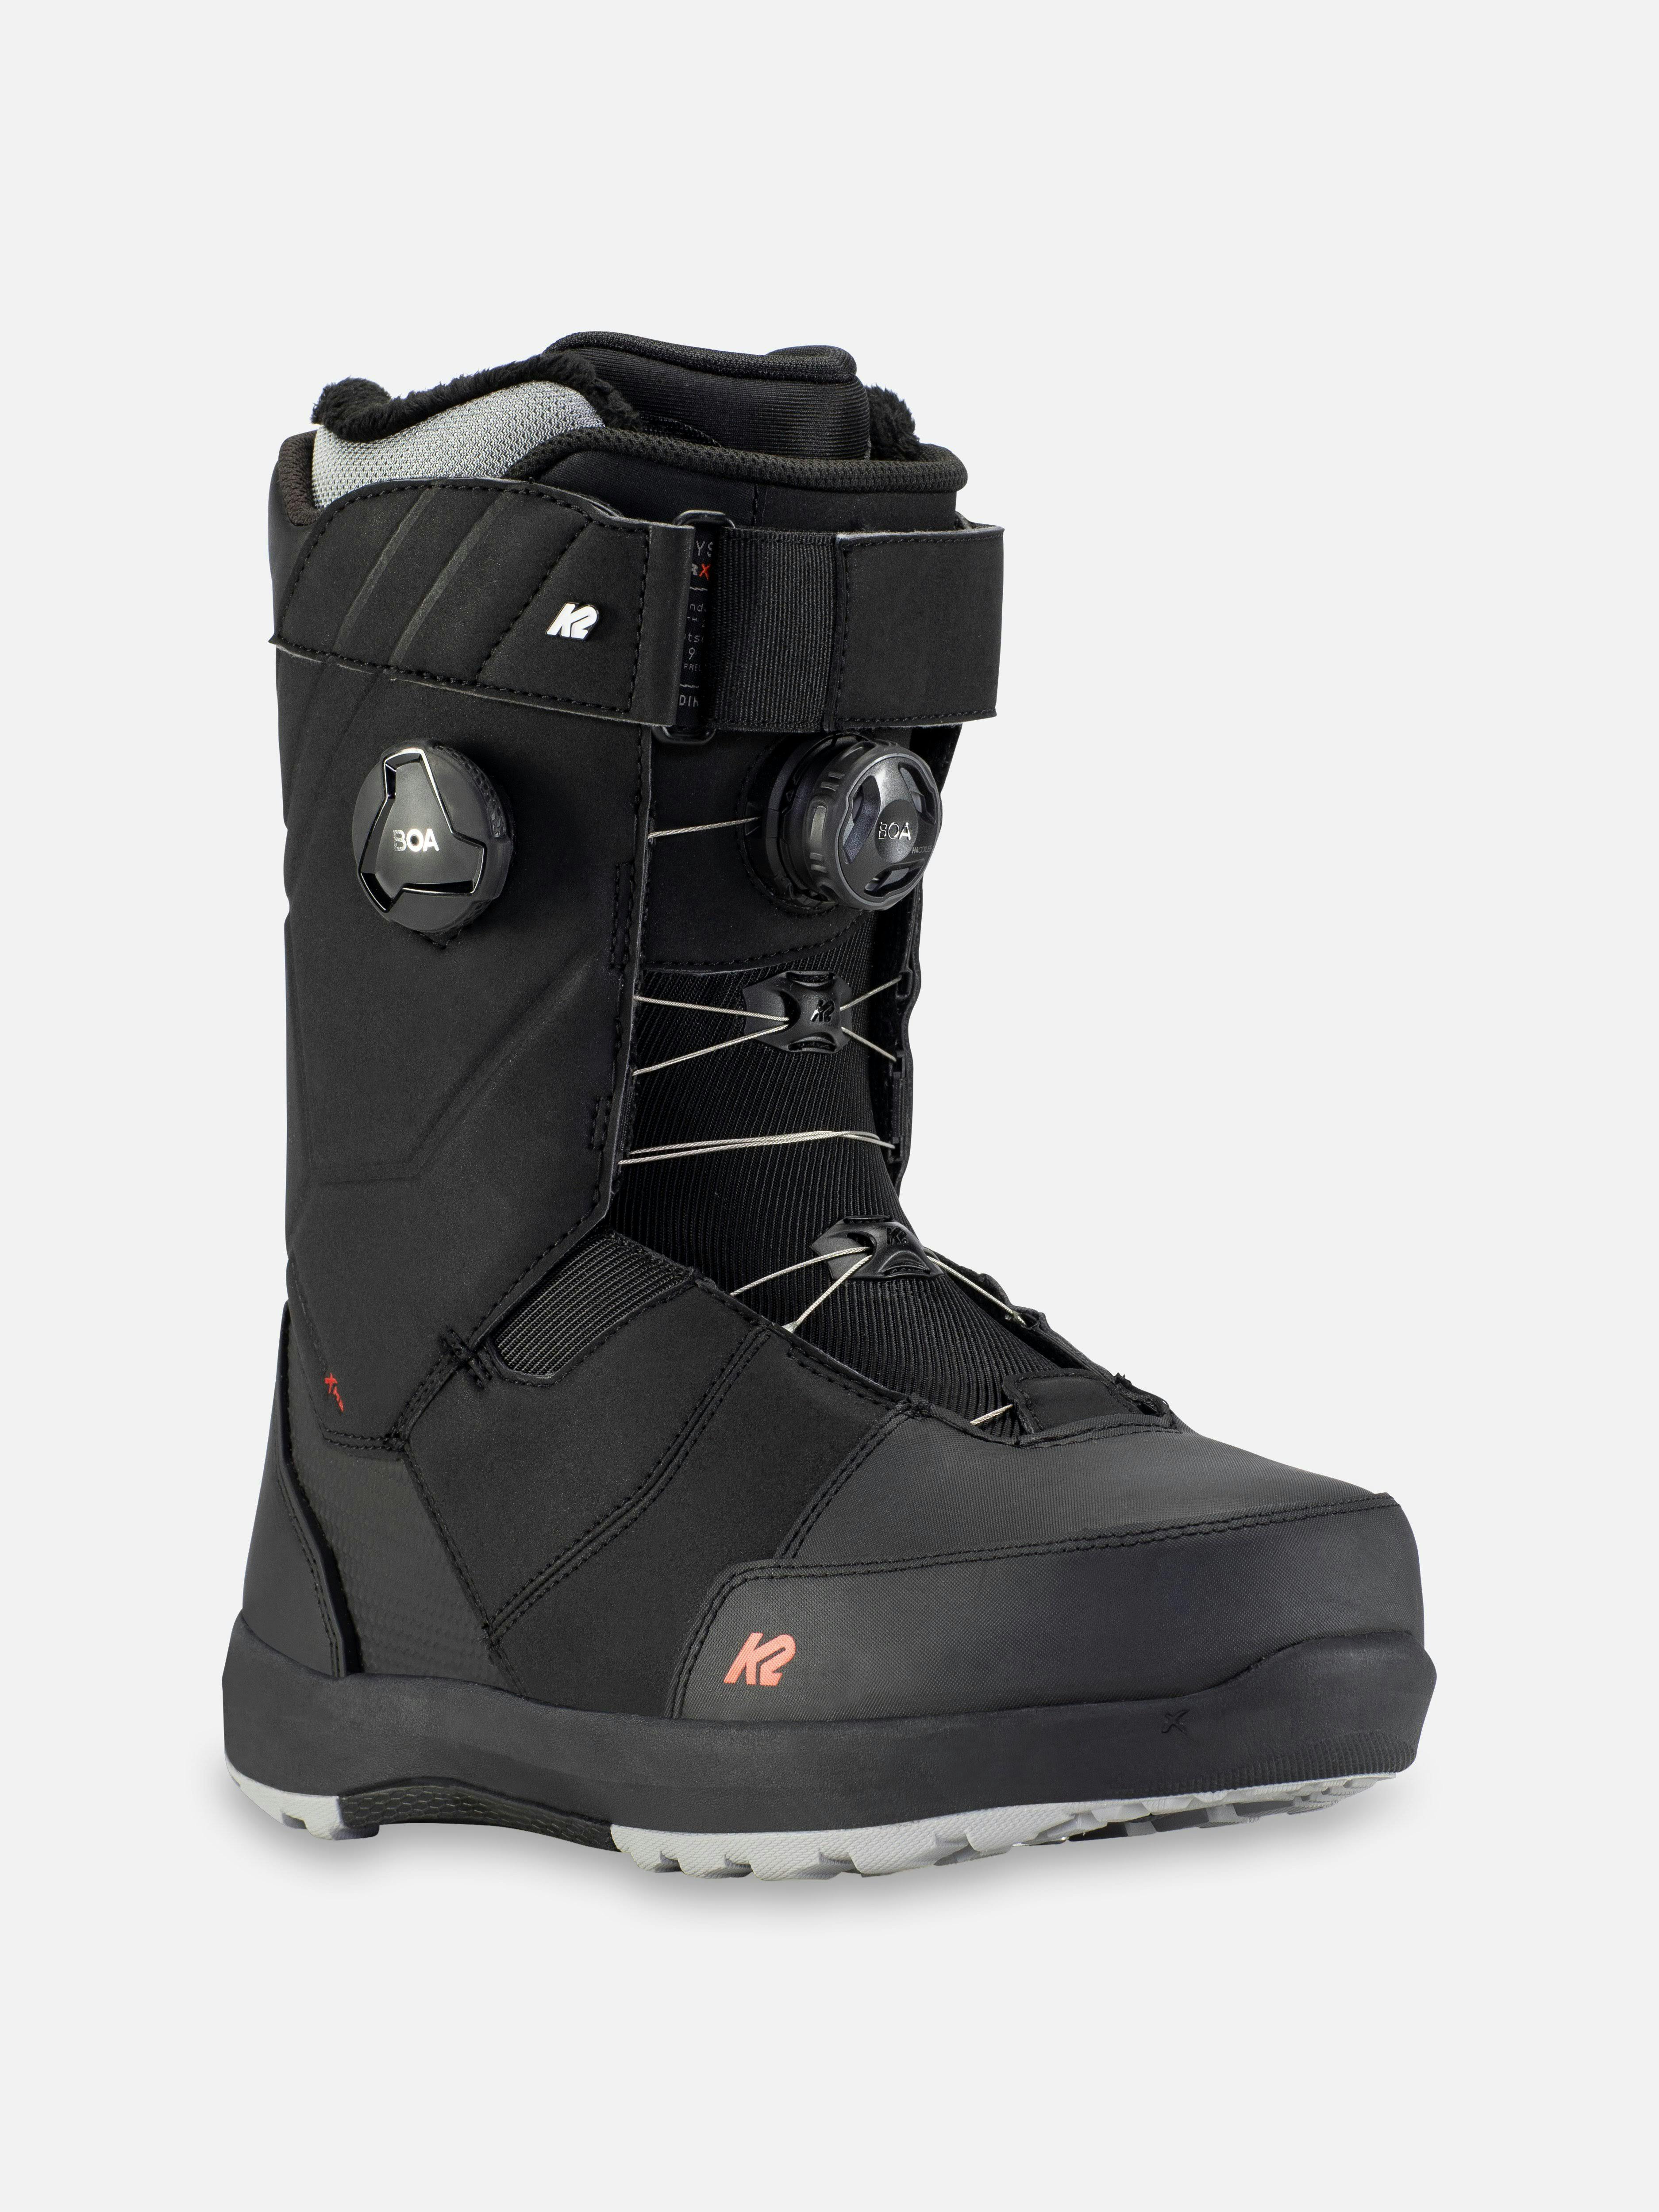 Top 10 Men's Ski Boots of 2022 | Curated.com